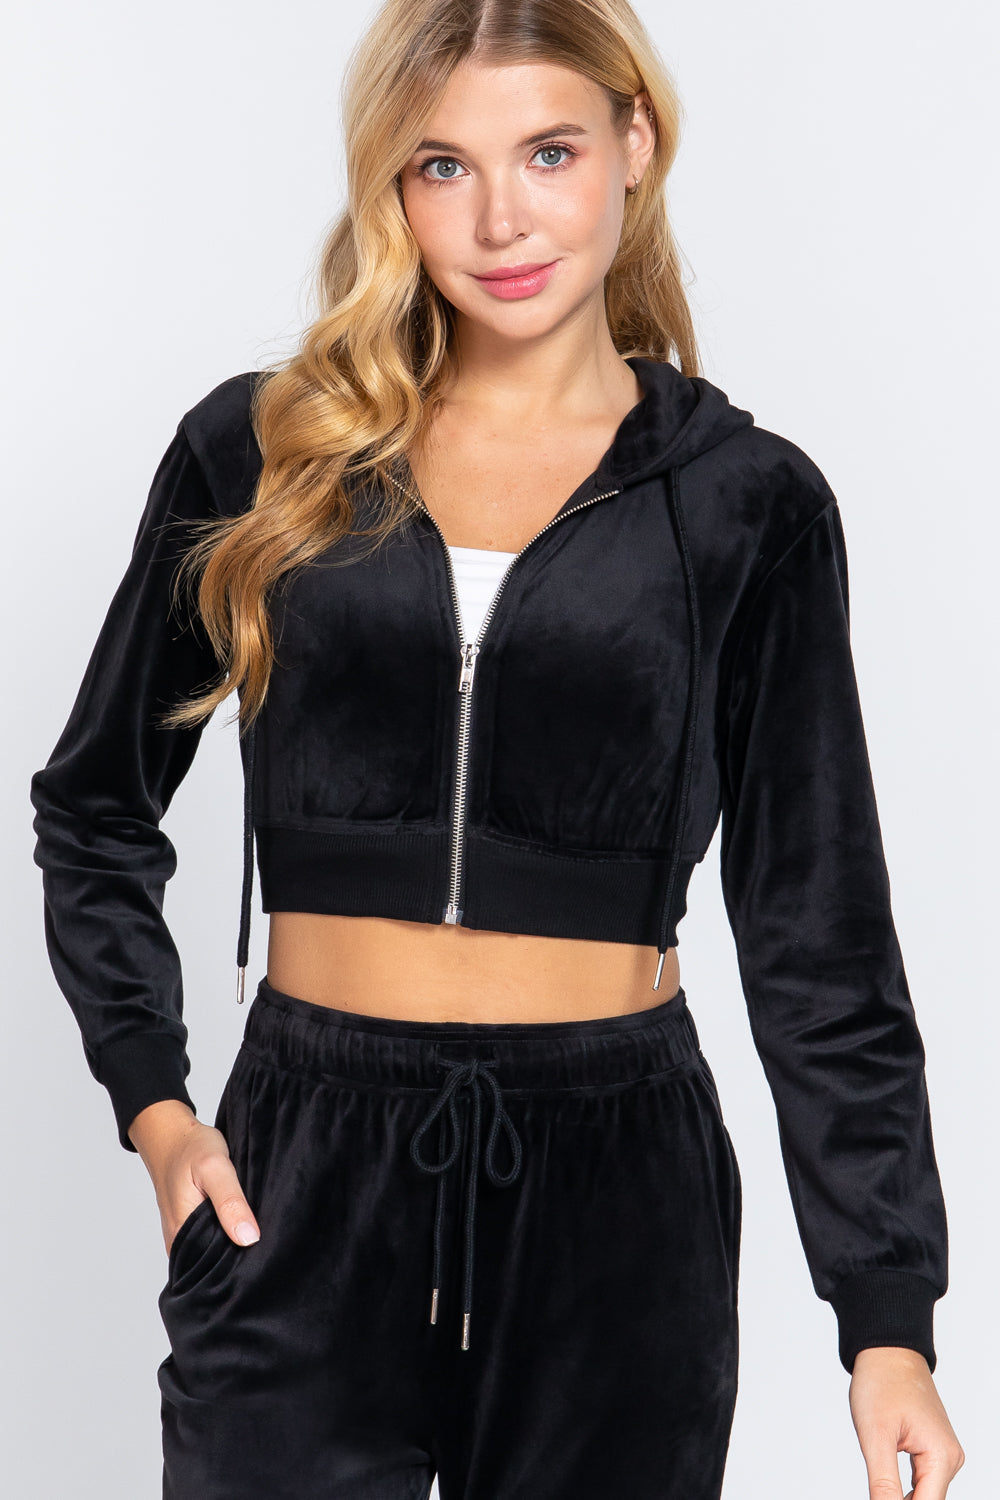 The802Gypsy  shirts and tops ❤GYPSY LOVE-Velour Hoodie Crop Jacket